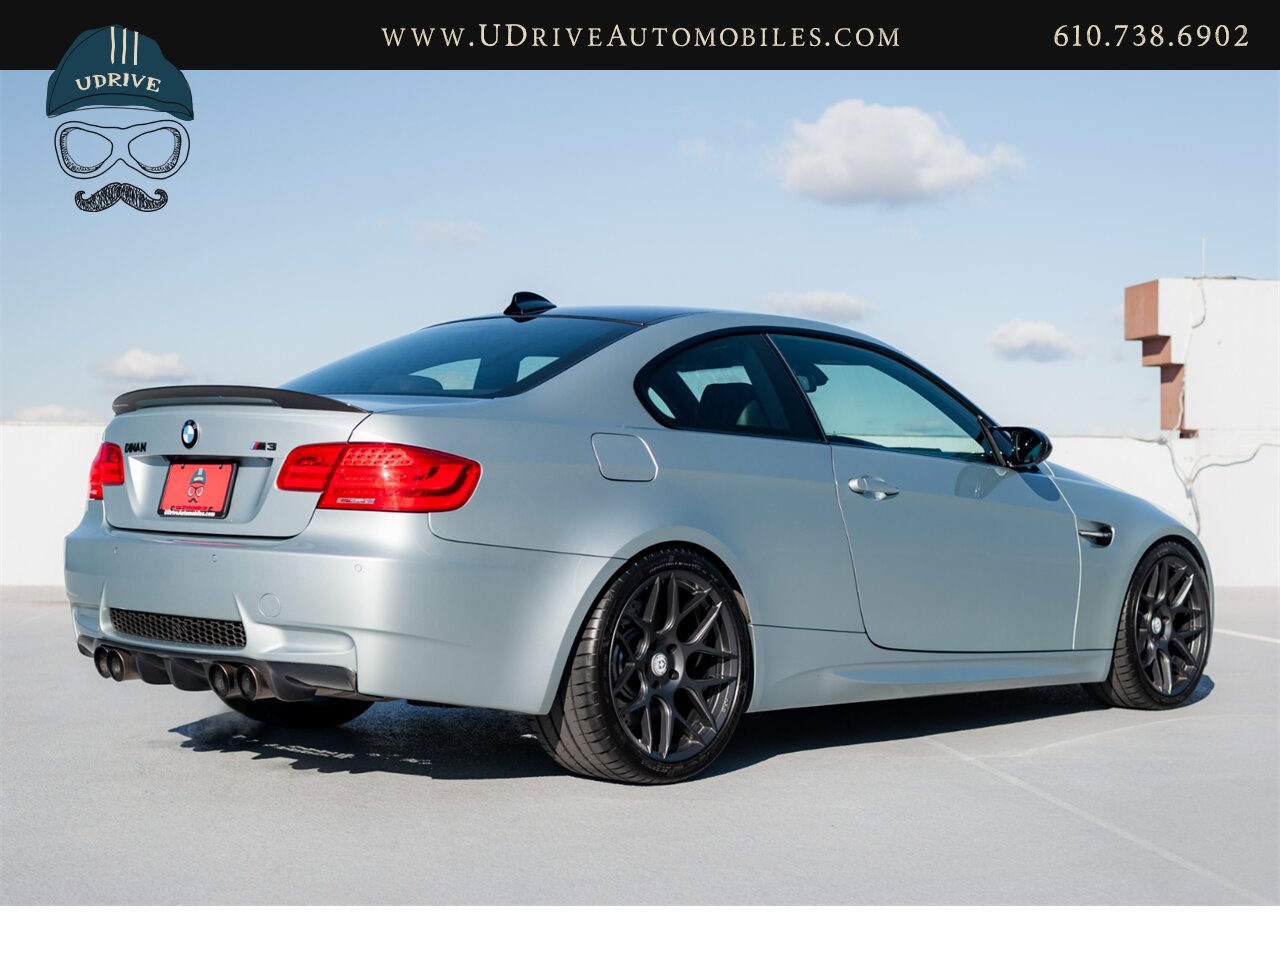 2008 BMW M3 Dinan S3-R M3 1 of 36 Produced DCT  1 Owner Full Service History 4.6L Stroker V8 - Photo 18 - West Chester, PA 19382